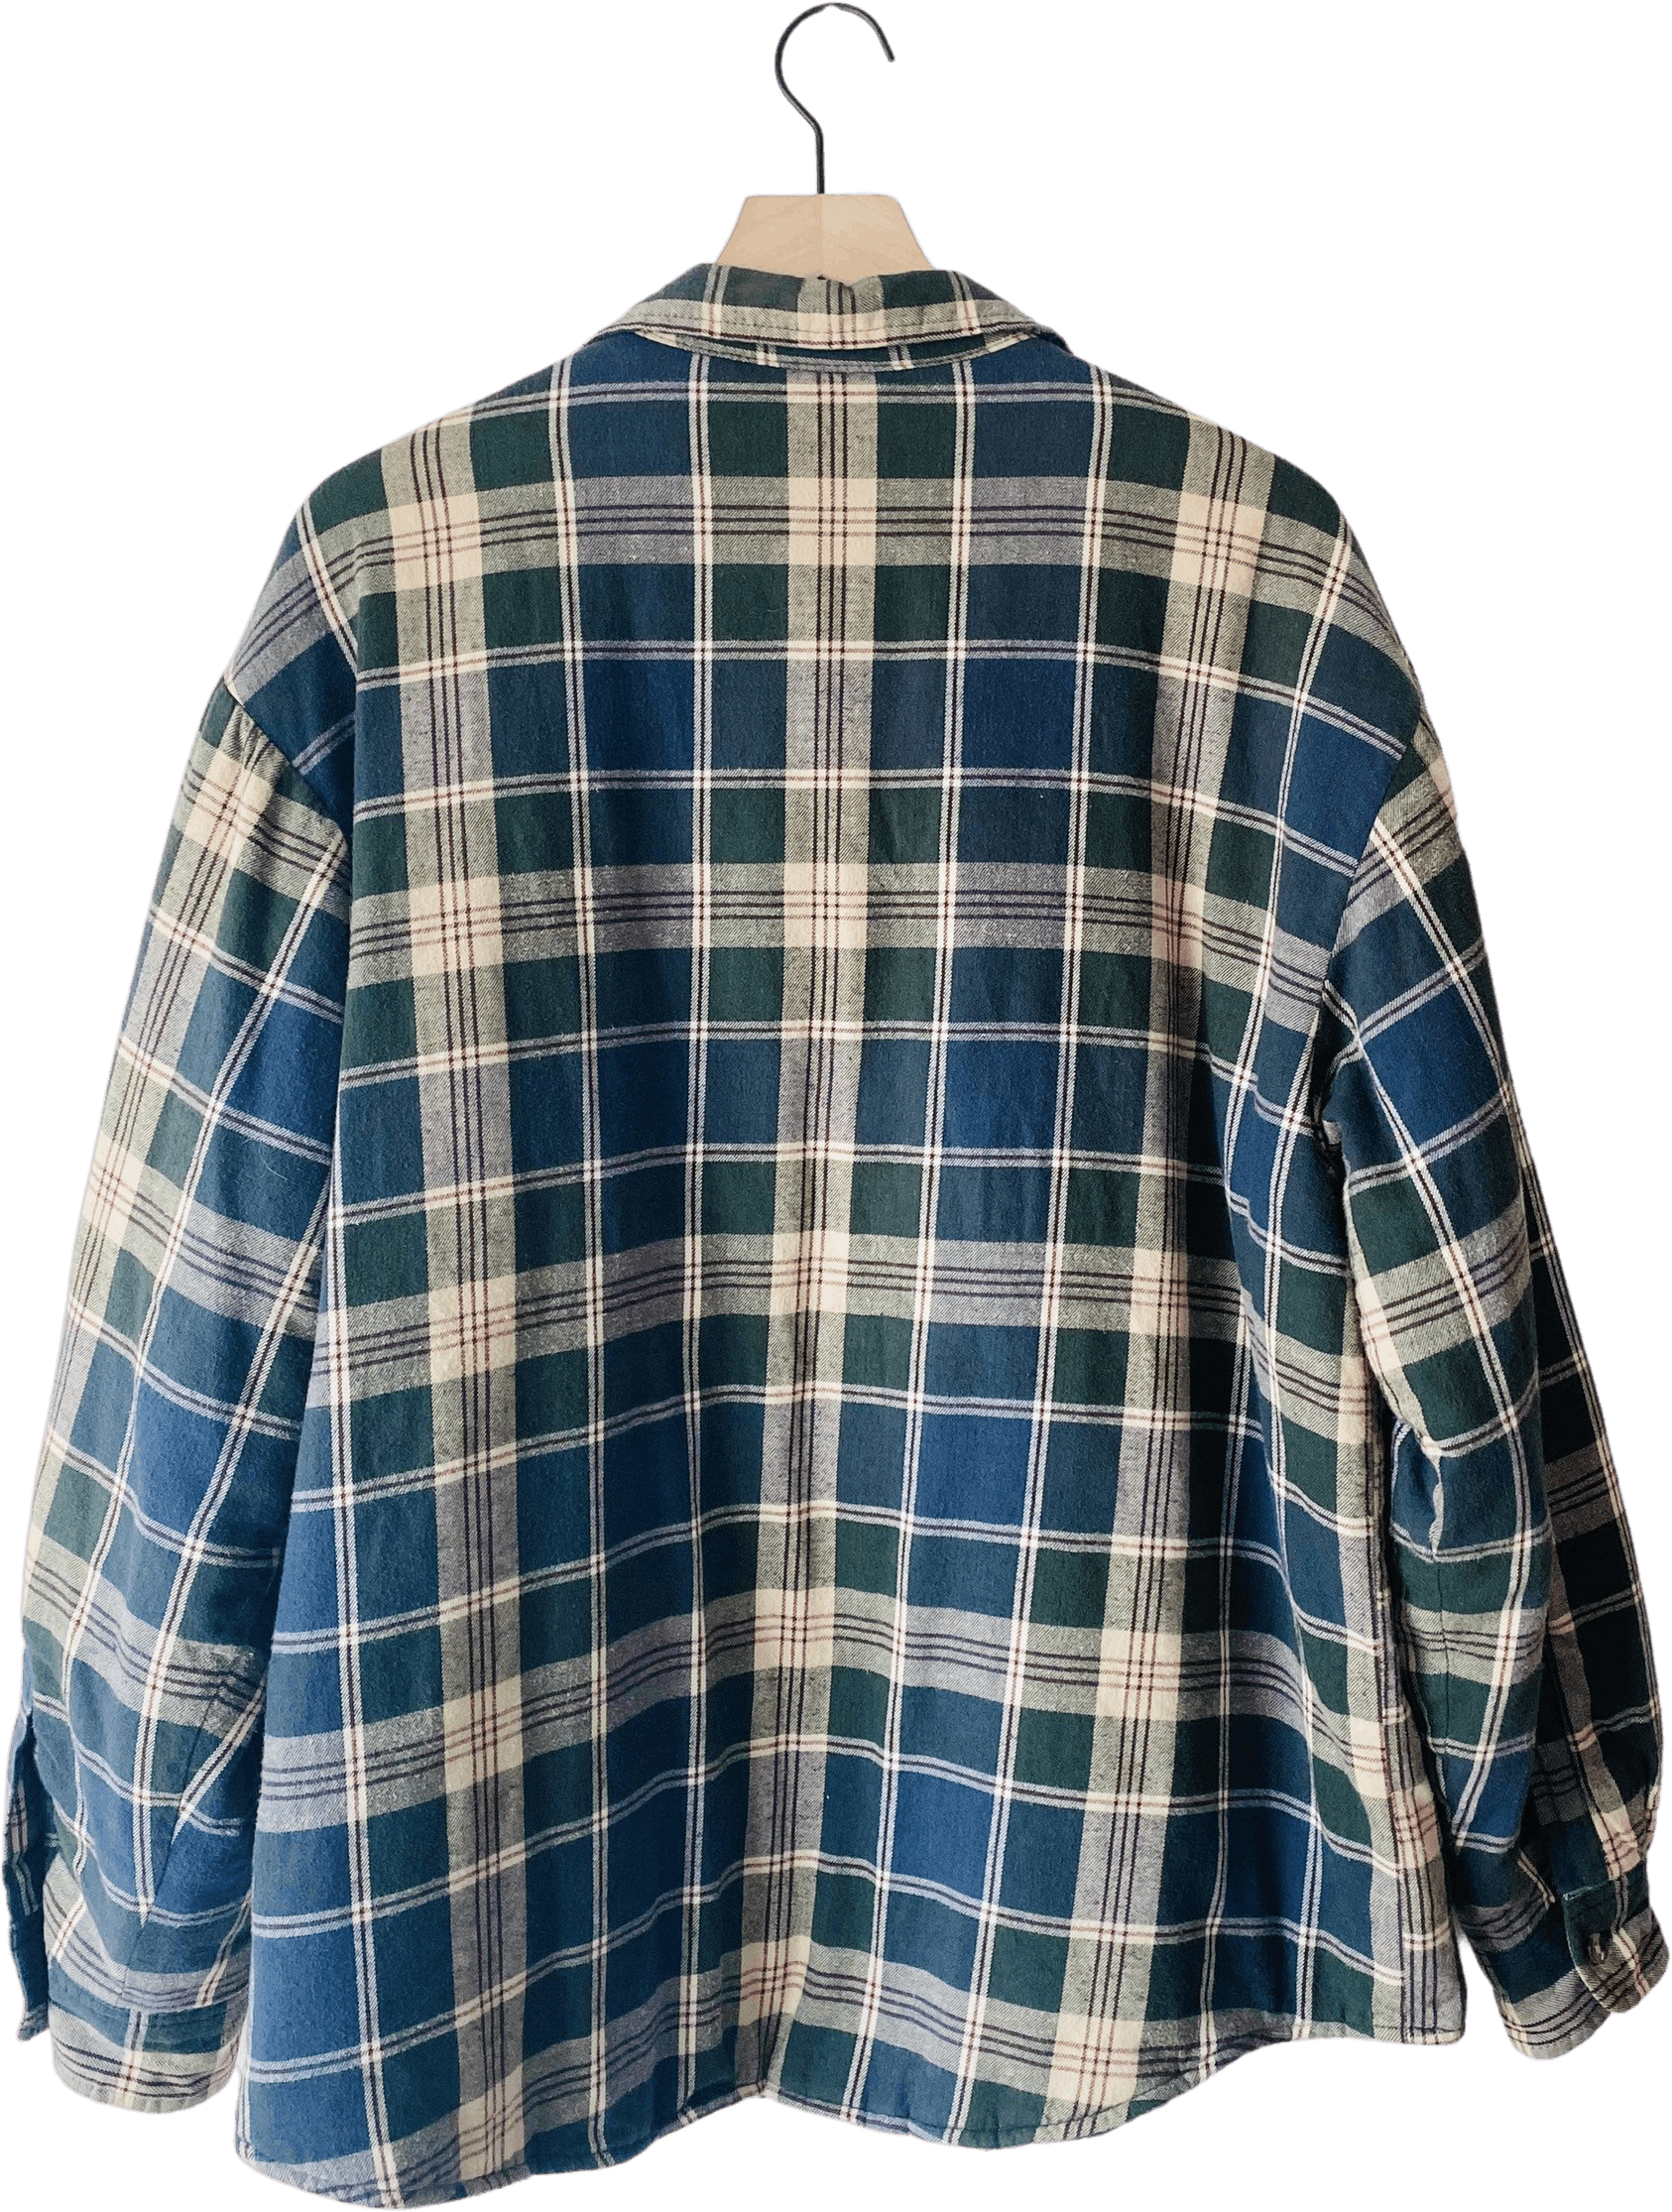 Vintage 90's Cozy Puff Flannel Jacket by David Taylor | Shop THRILLING